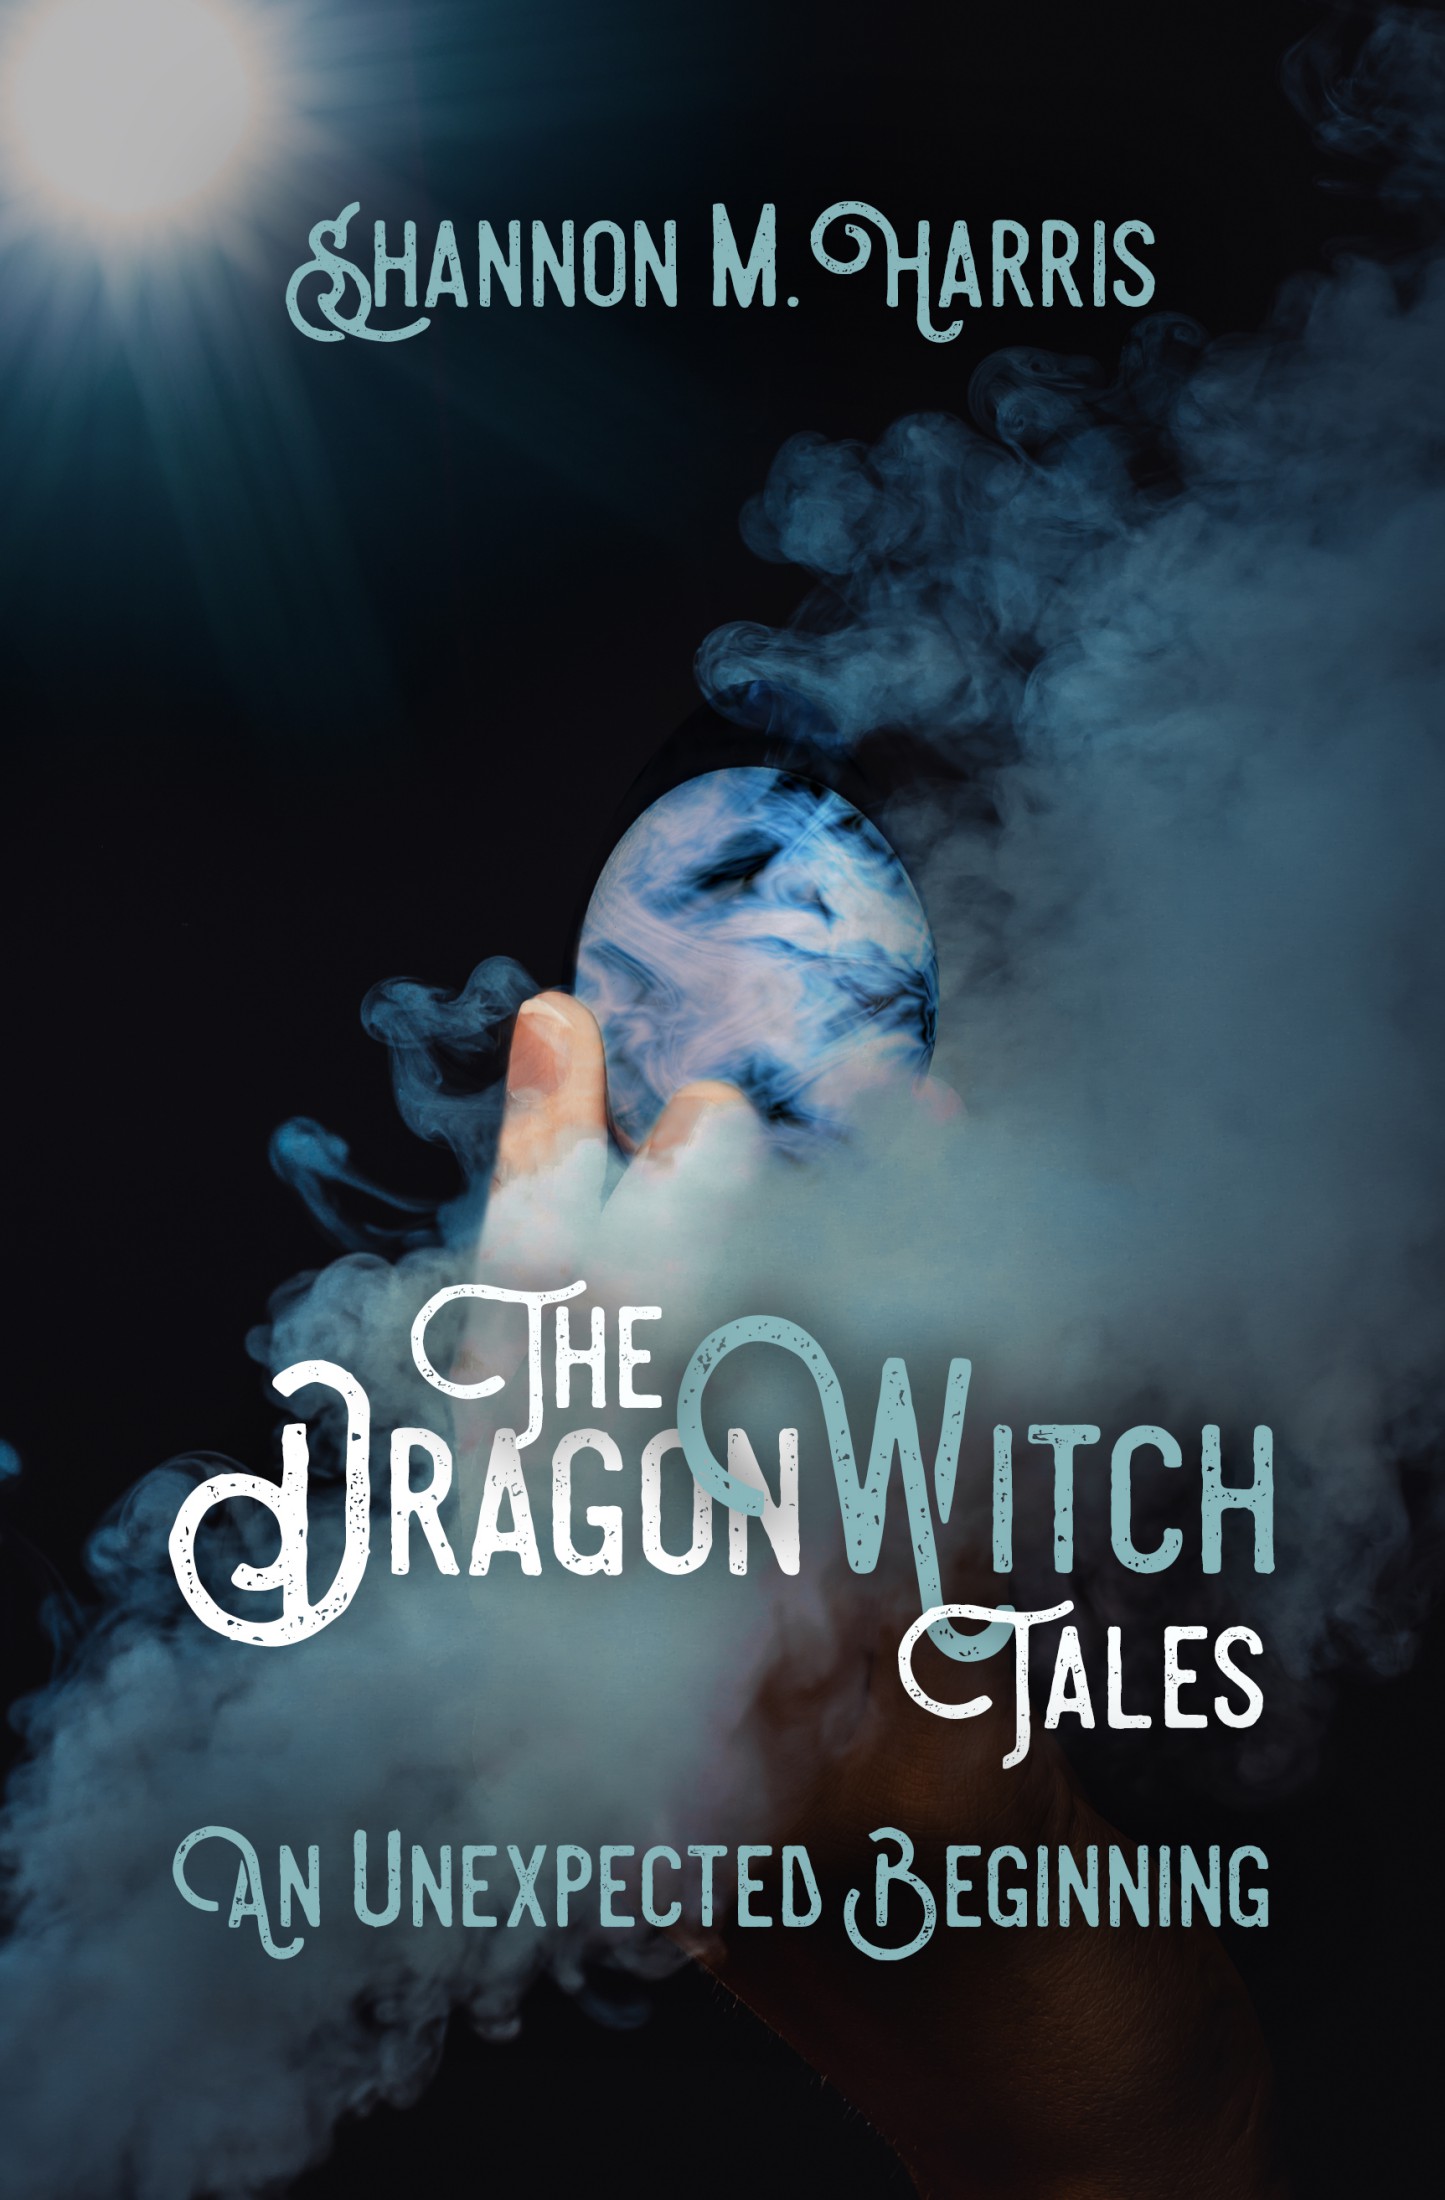 The DragonWitch Tales - An Unexpected Beginning